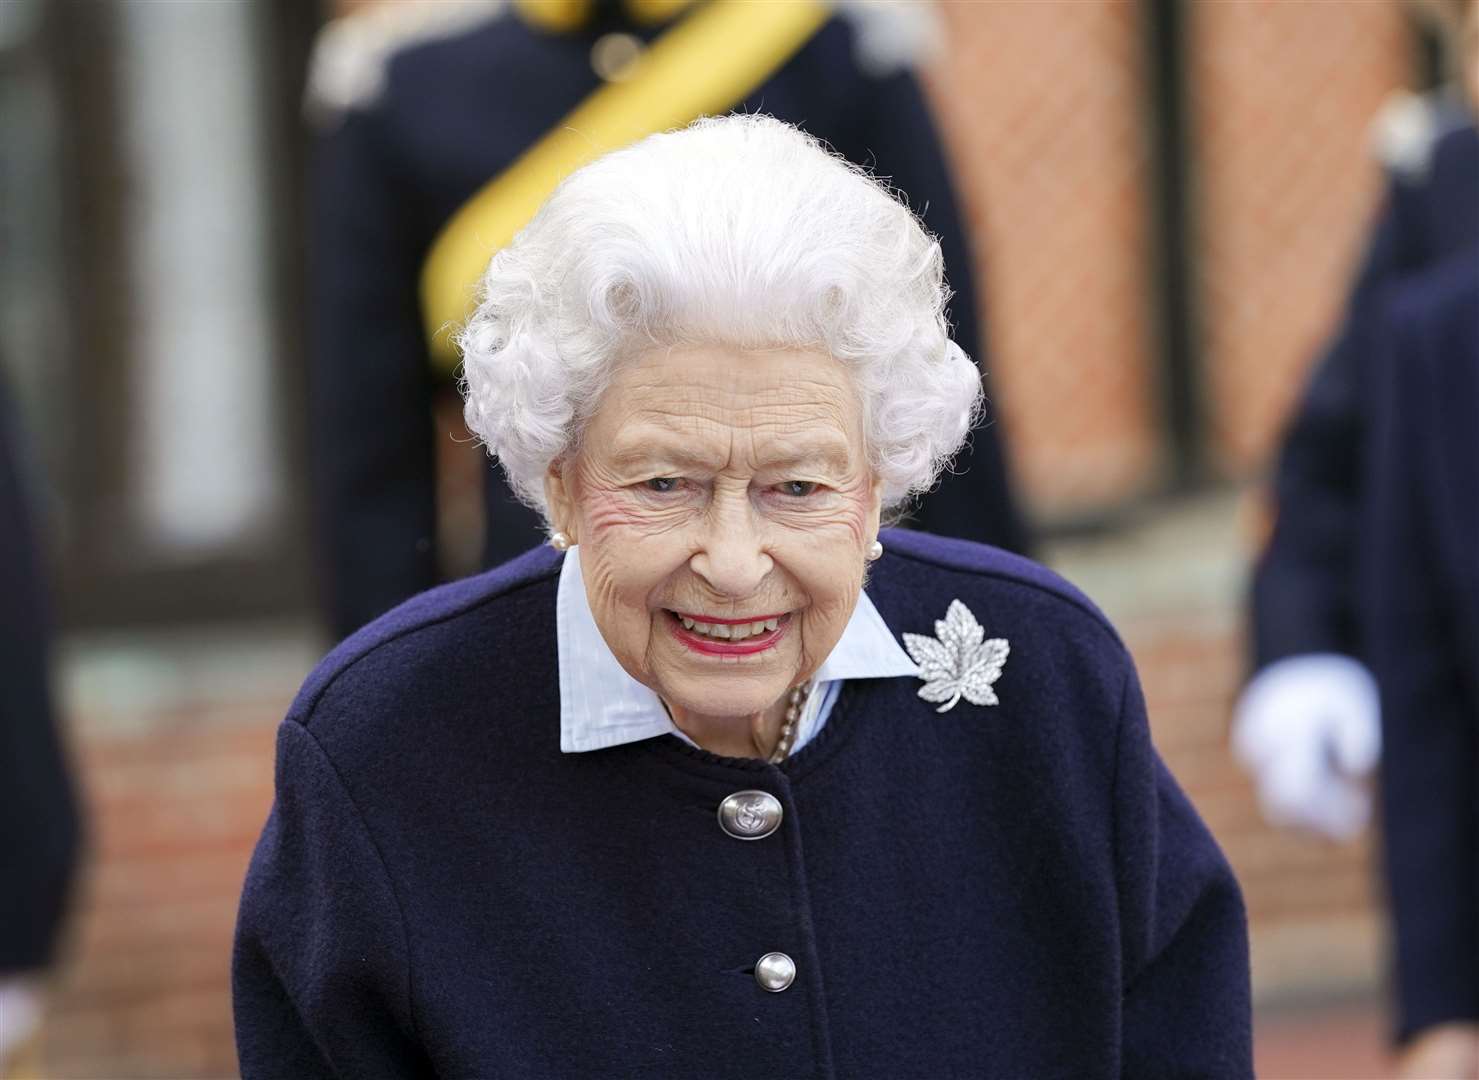 Jaswant Singh Chail admitted trying to harm the Queen (Steve Parsons/PA)